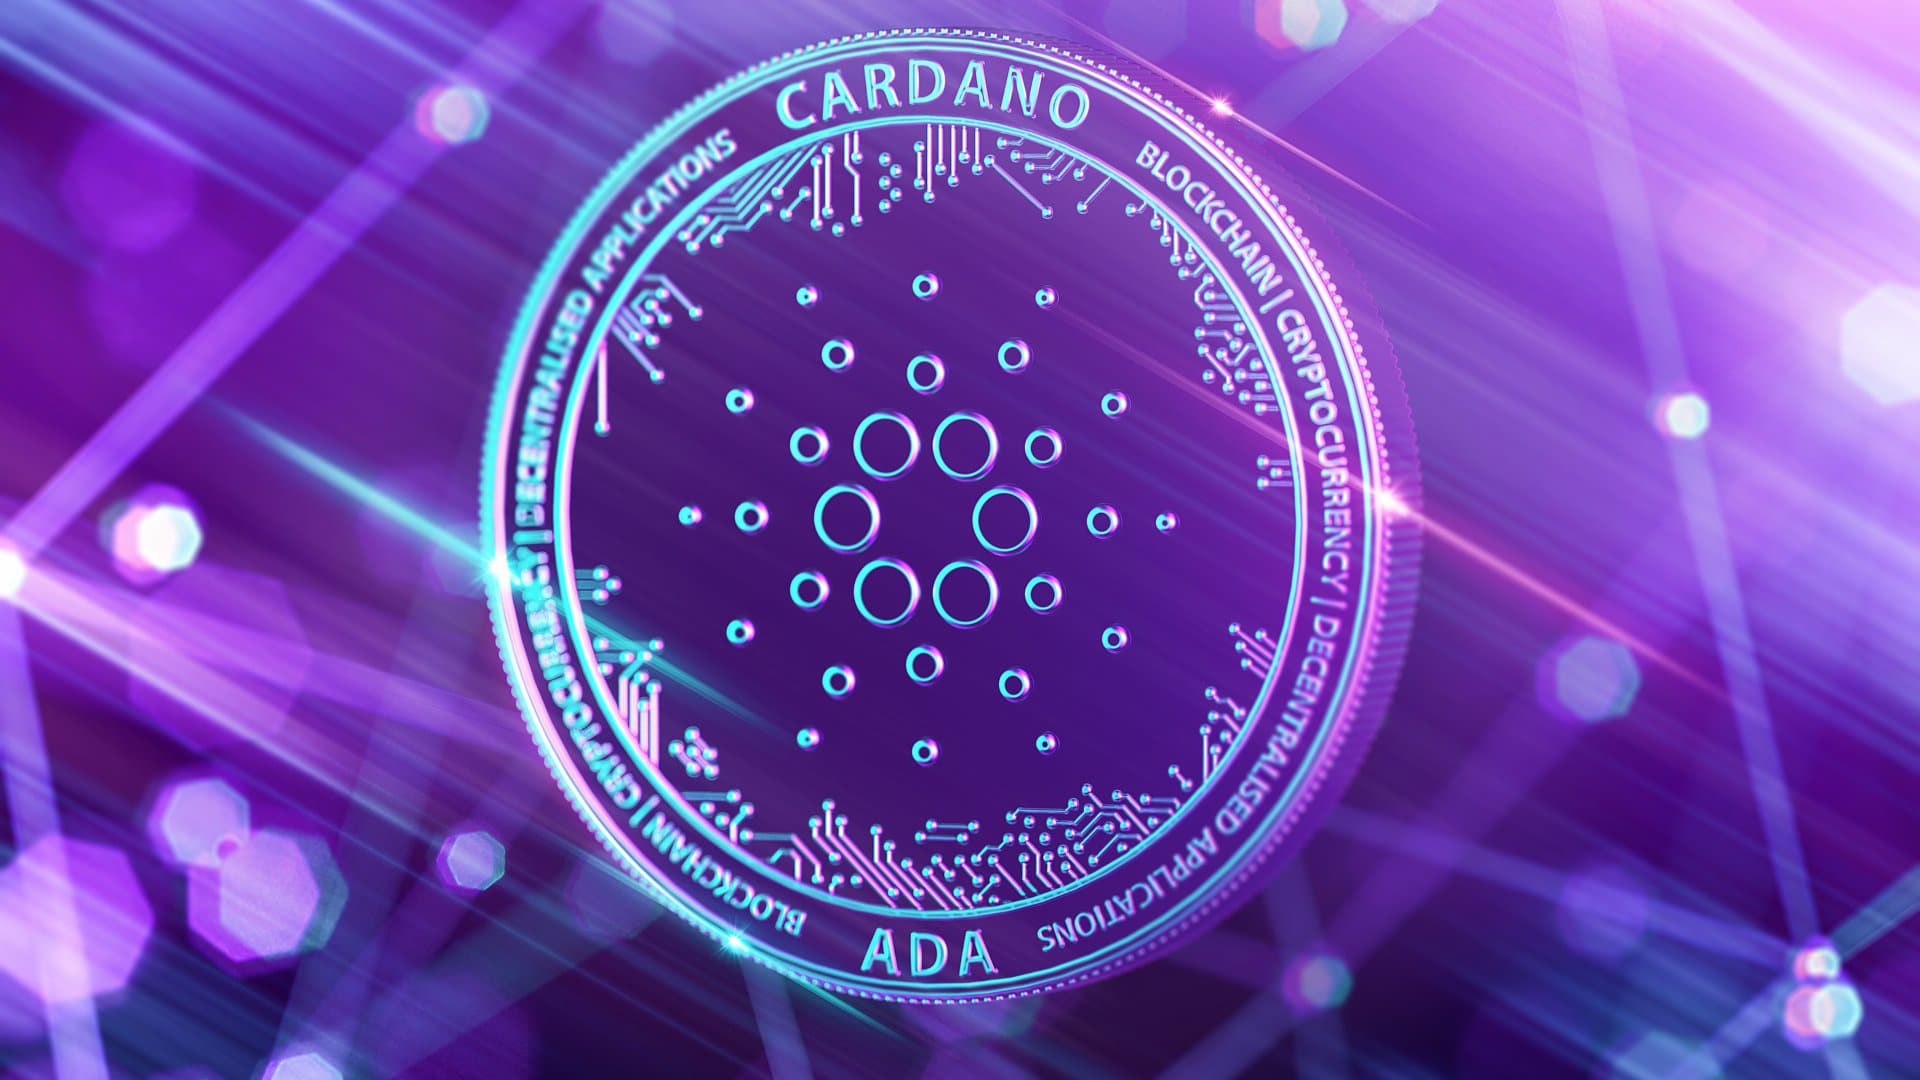 What Blockchain Is Cardano On